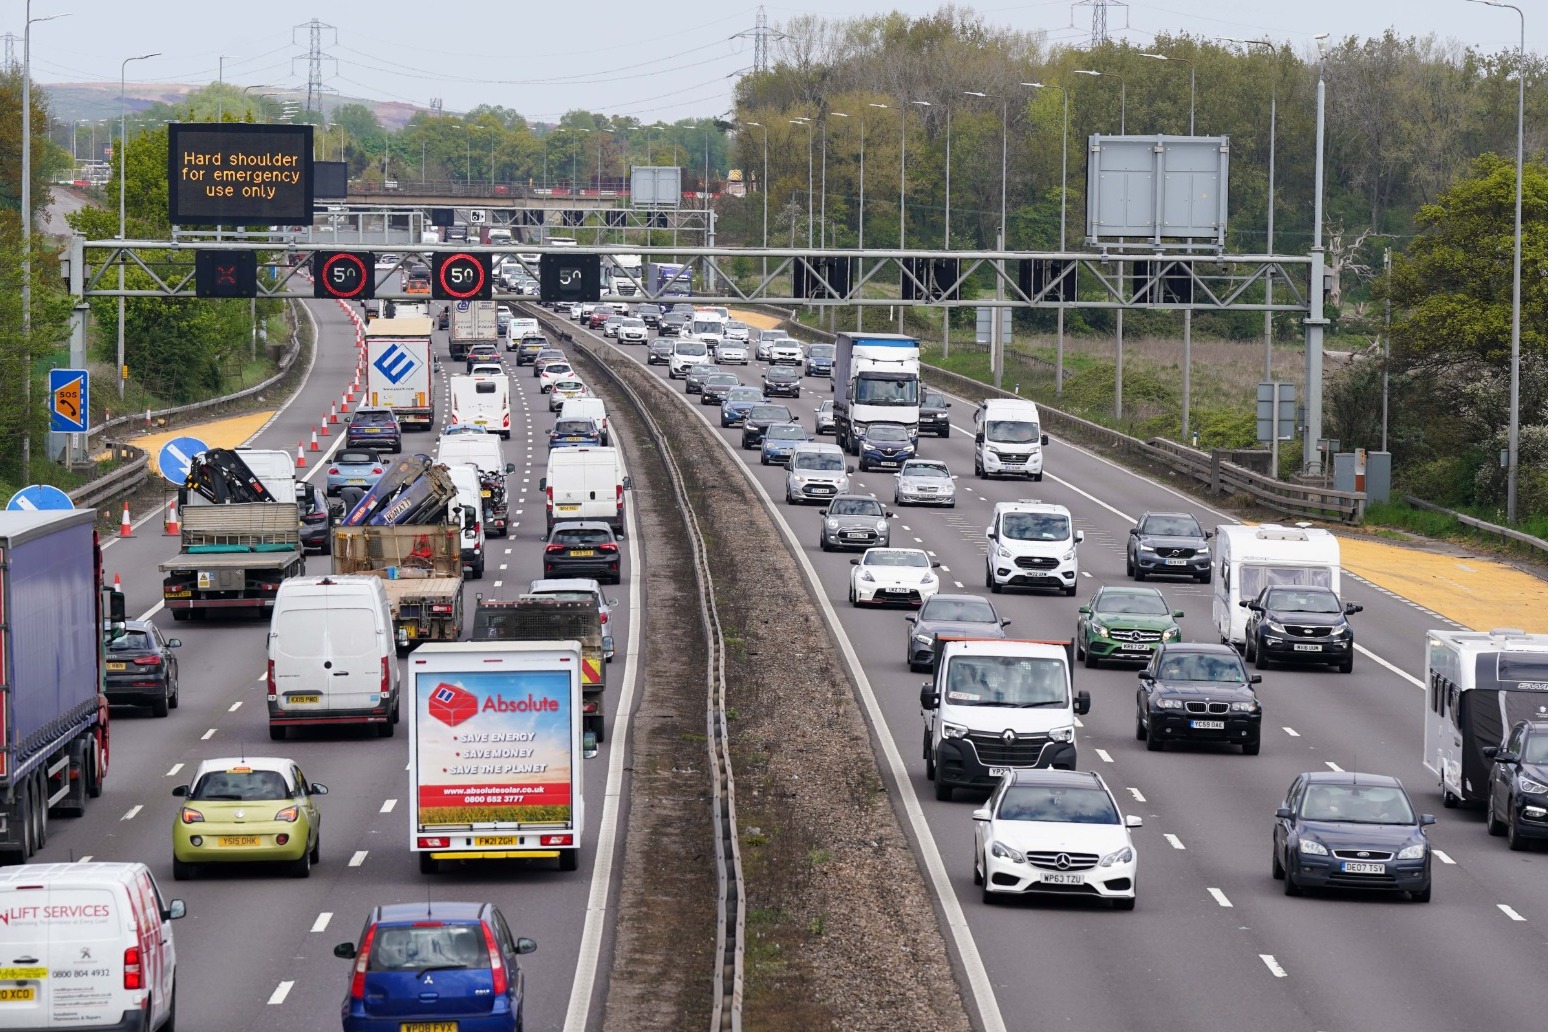 Drivers warned to expect big increase in traffic during rail strikes